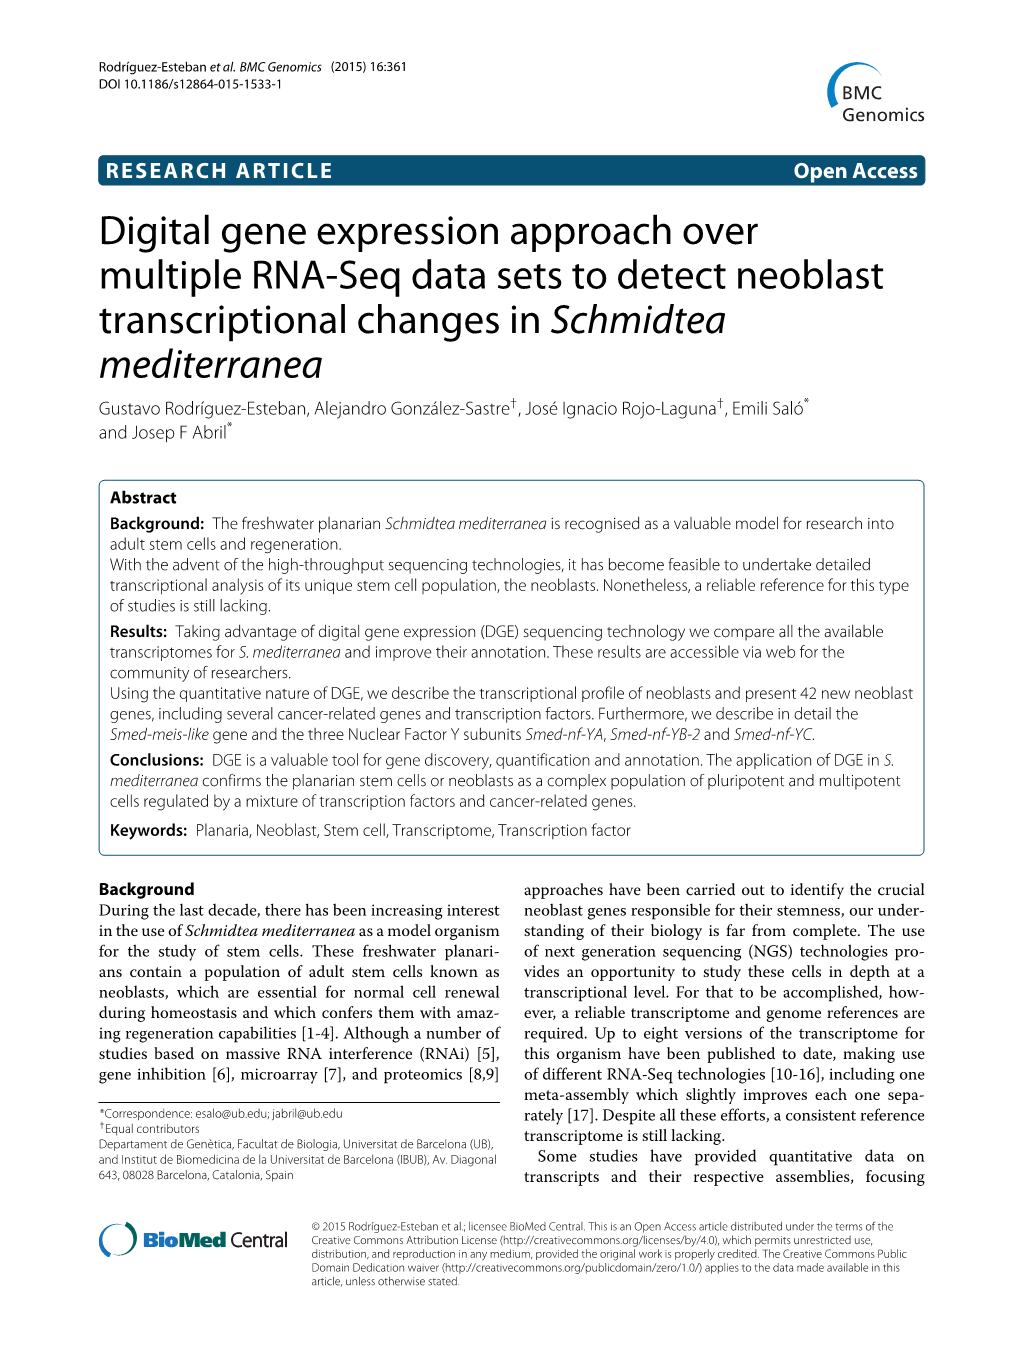 Digital Gene Expression Approach Over Multiple RNA-Seq Data Sets To